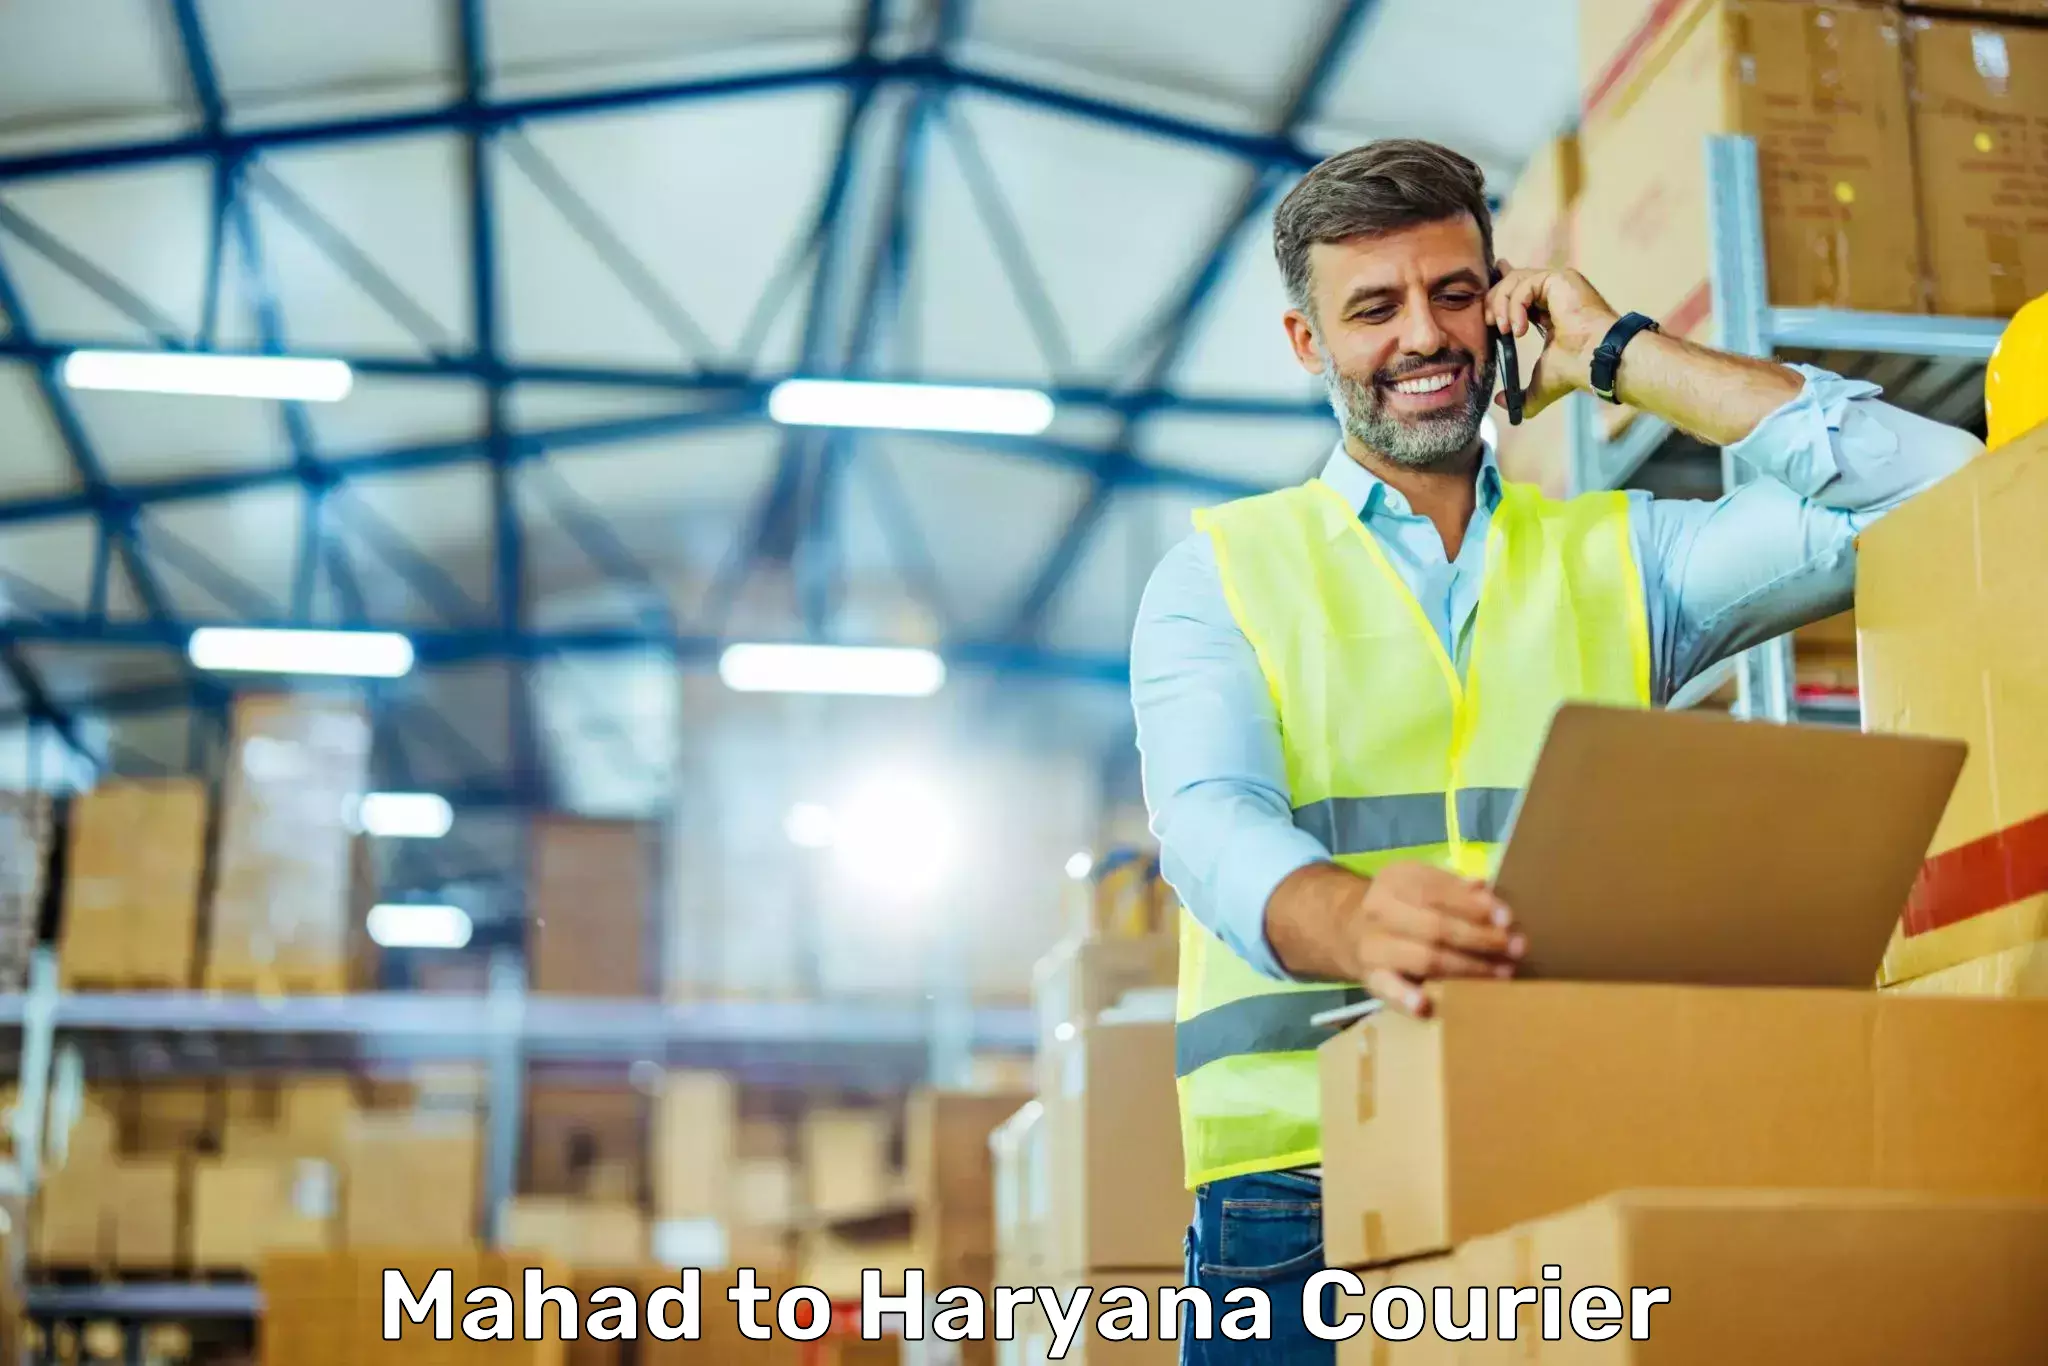 High-speed delivery Mahad to Panchkula